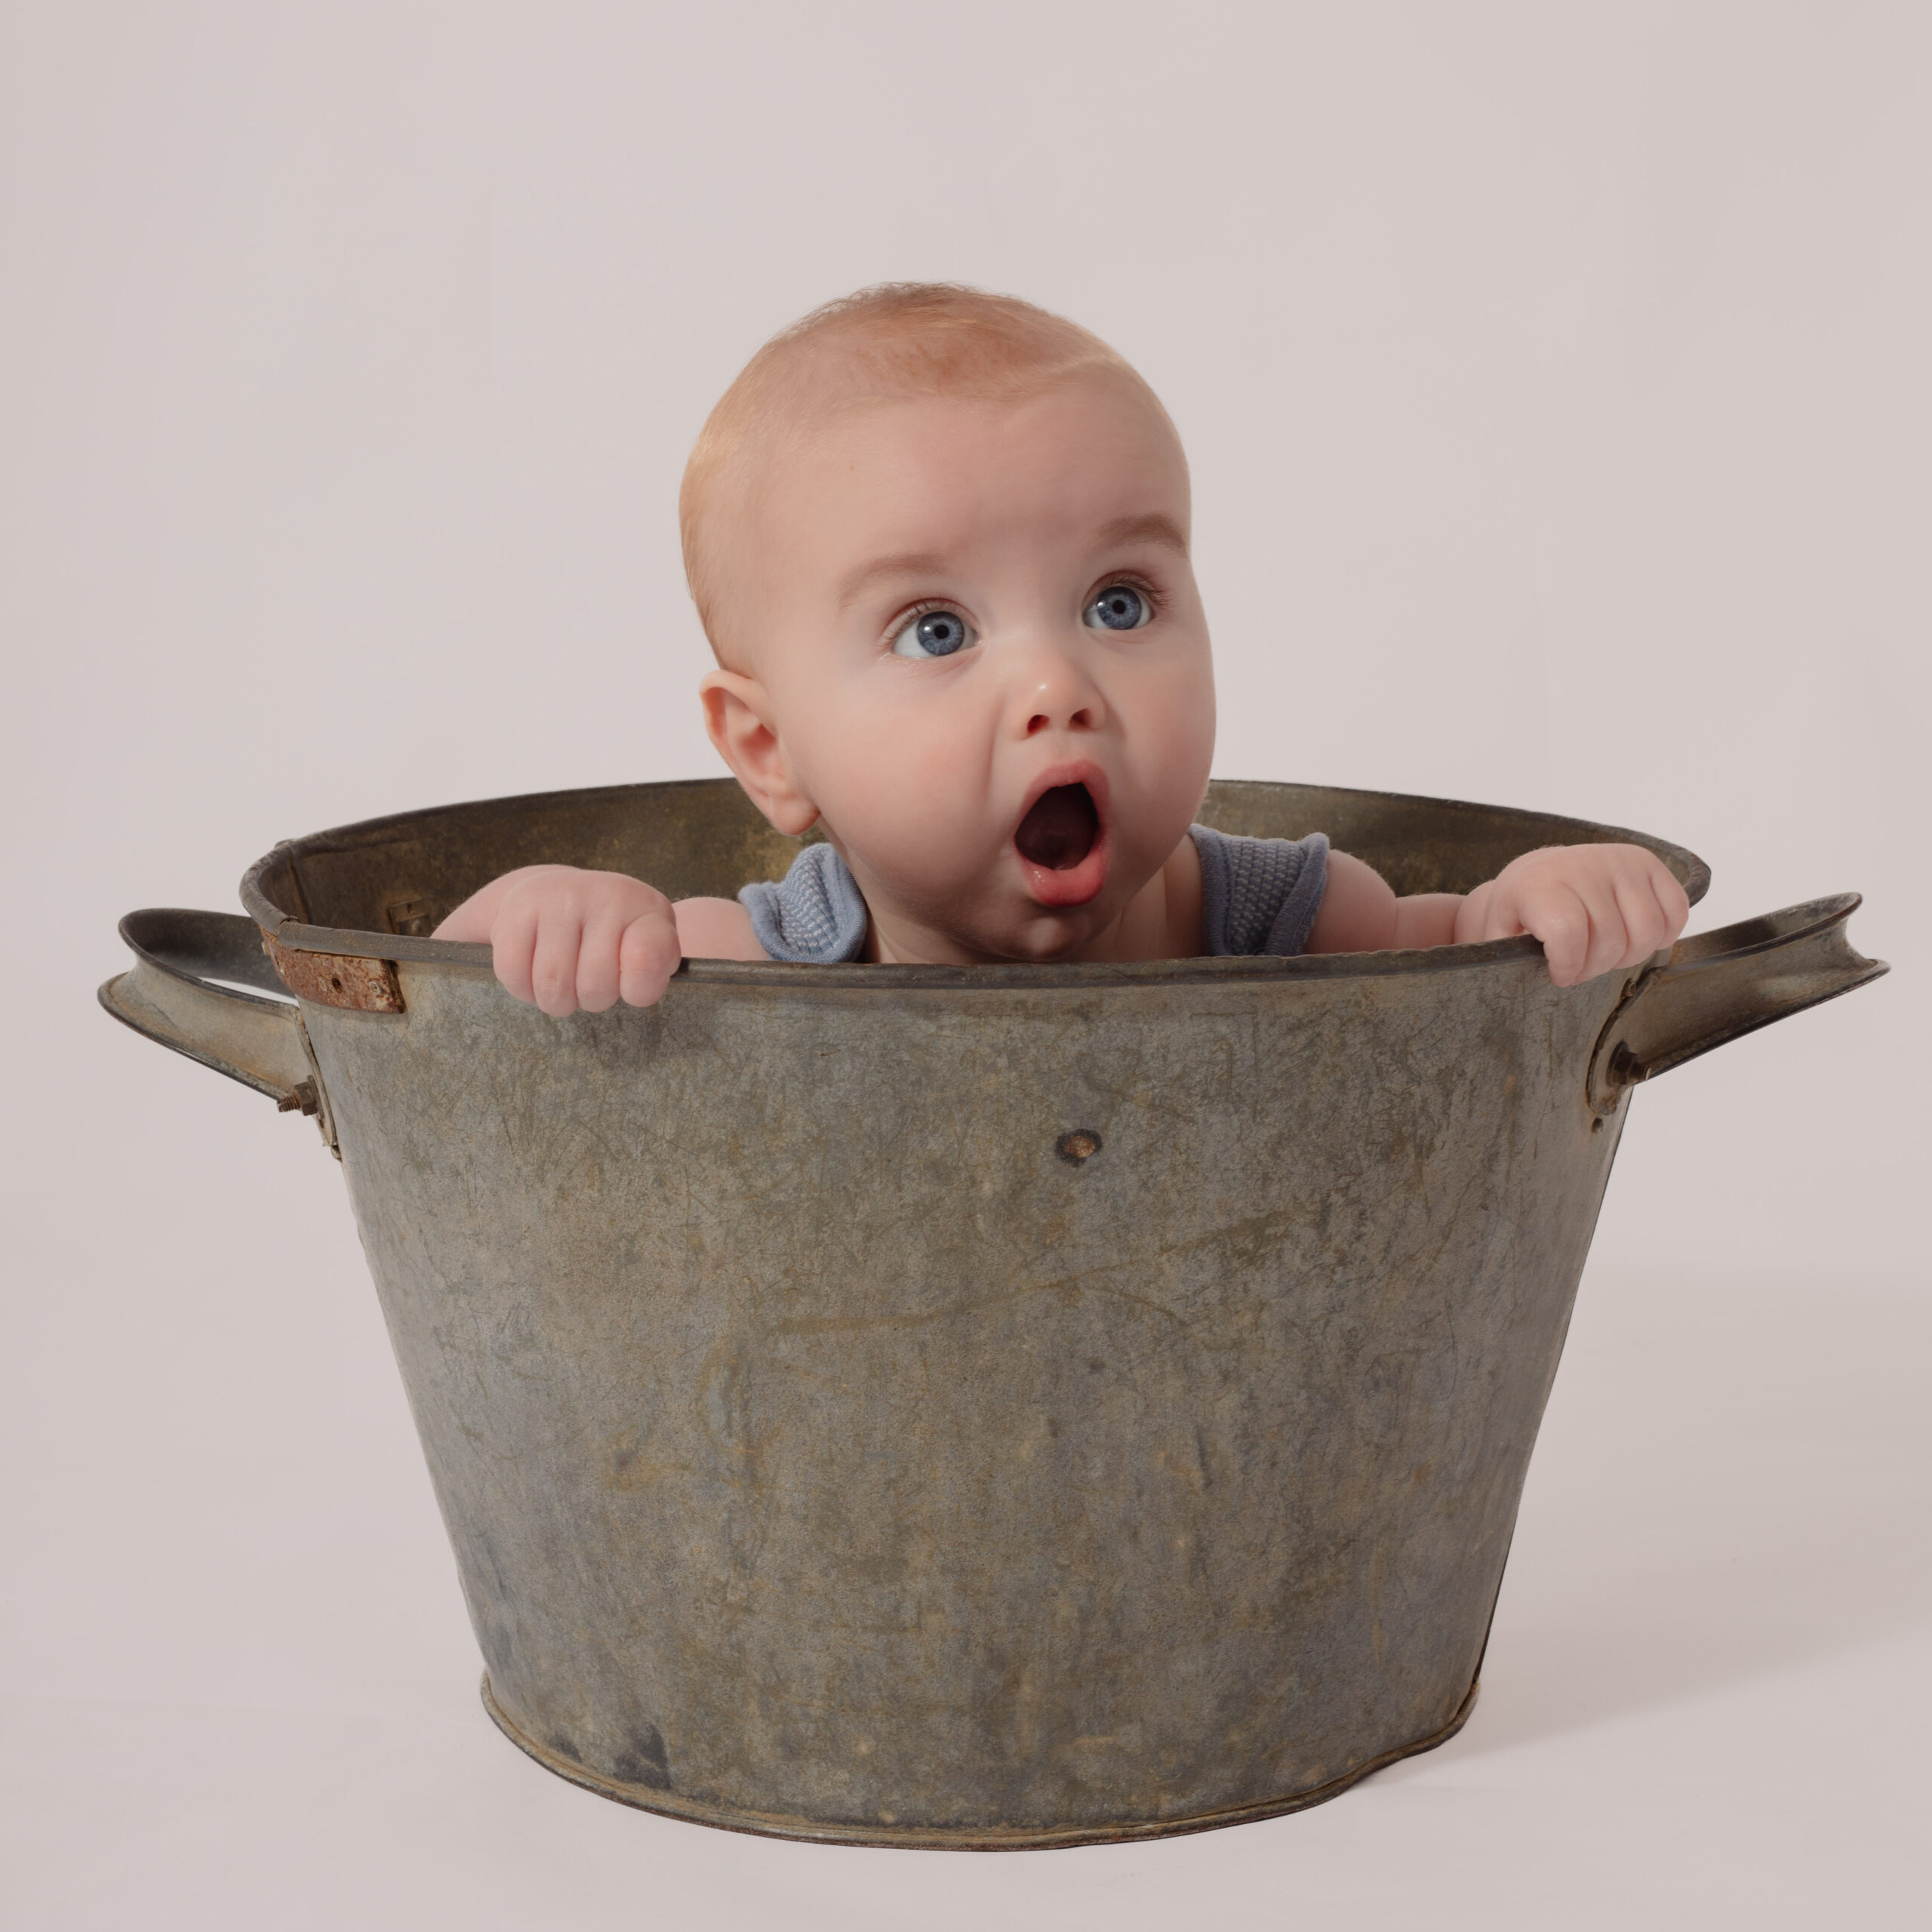 Baby boy in a bucket, holding onto the side with his mouth open